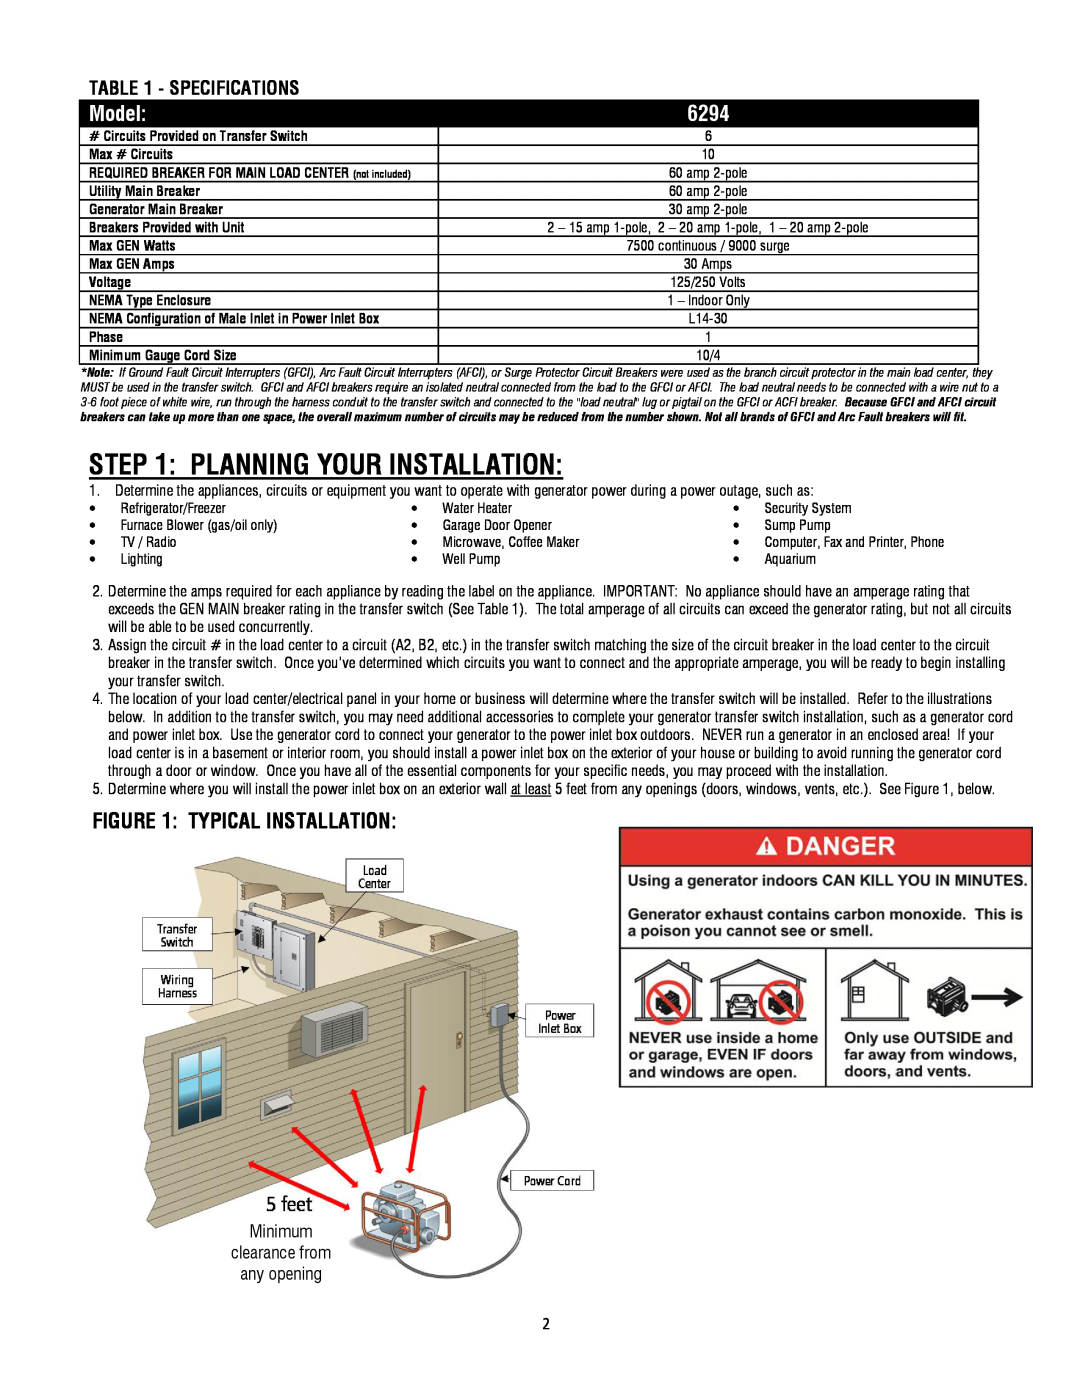 Generac 6294 Planning Your Installation, Typical Installation, Specifications, Model, Minimum clearance from any opening 